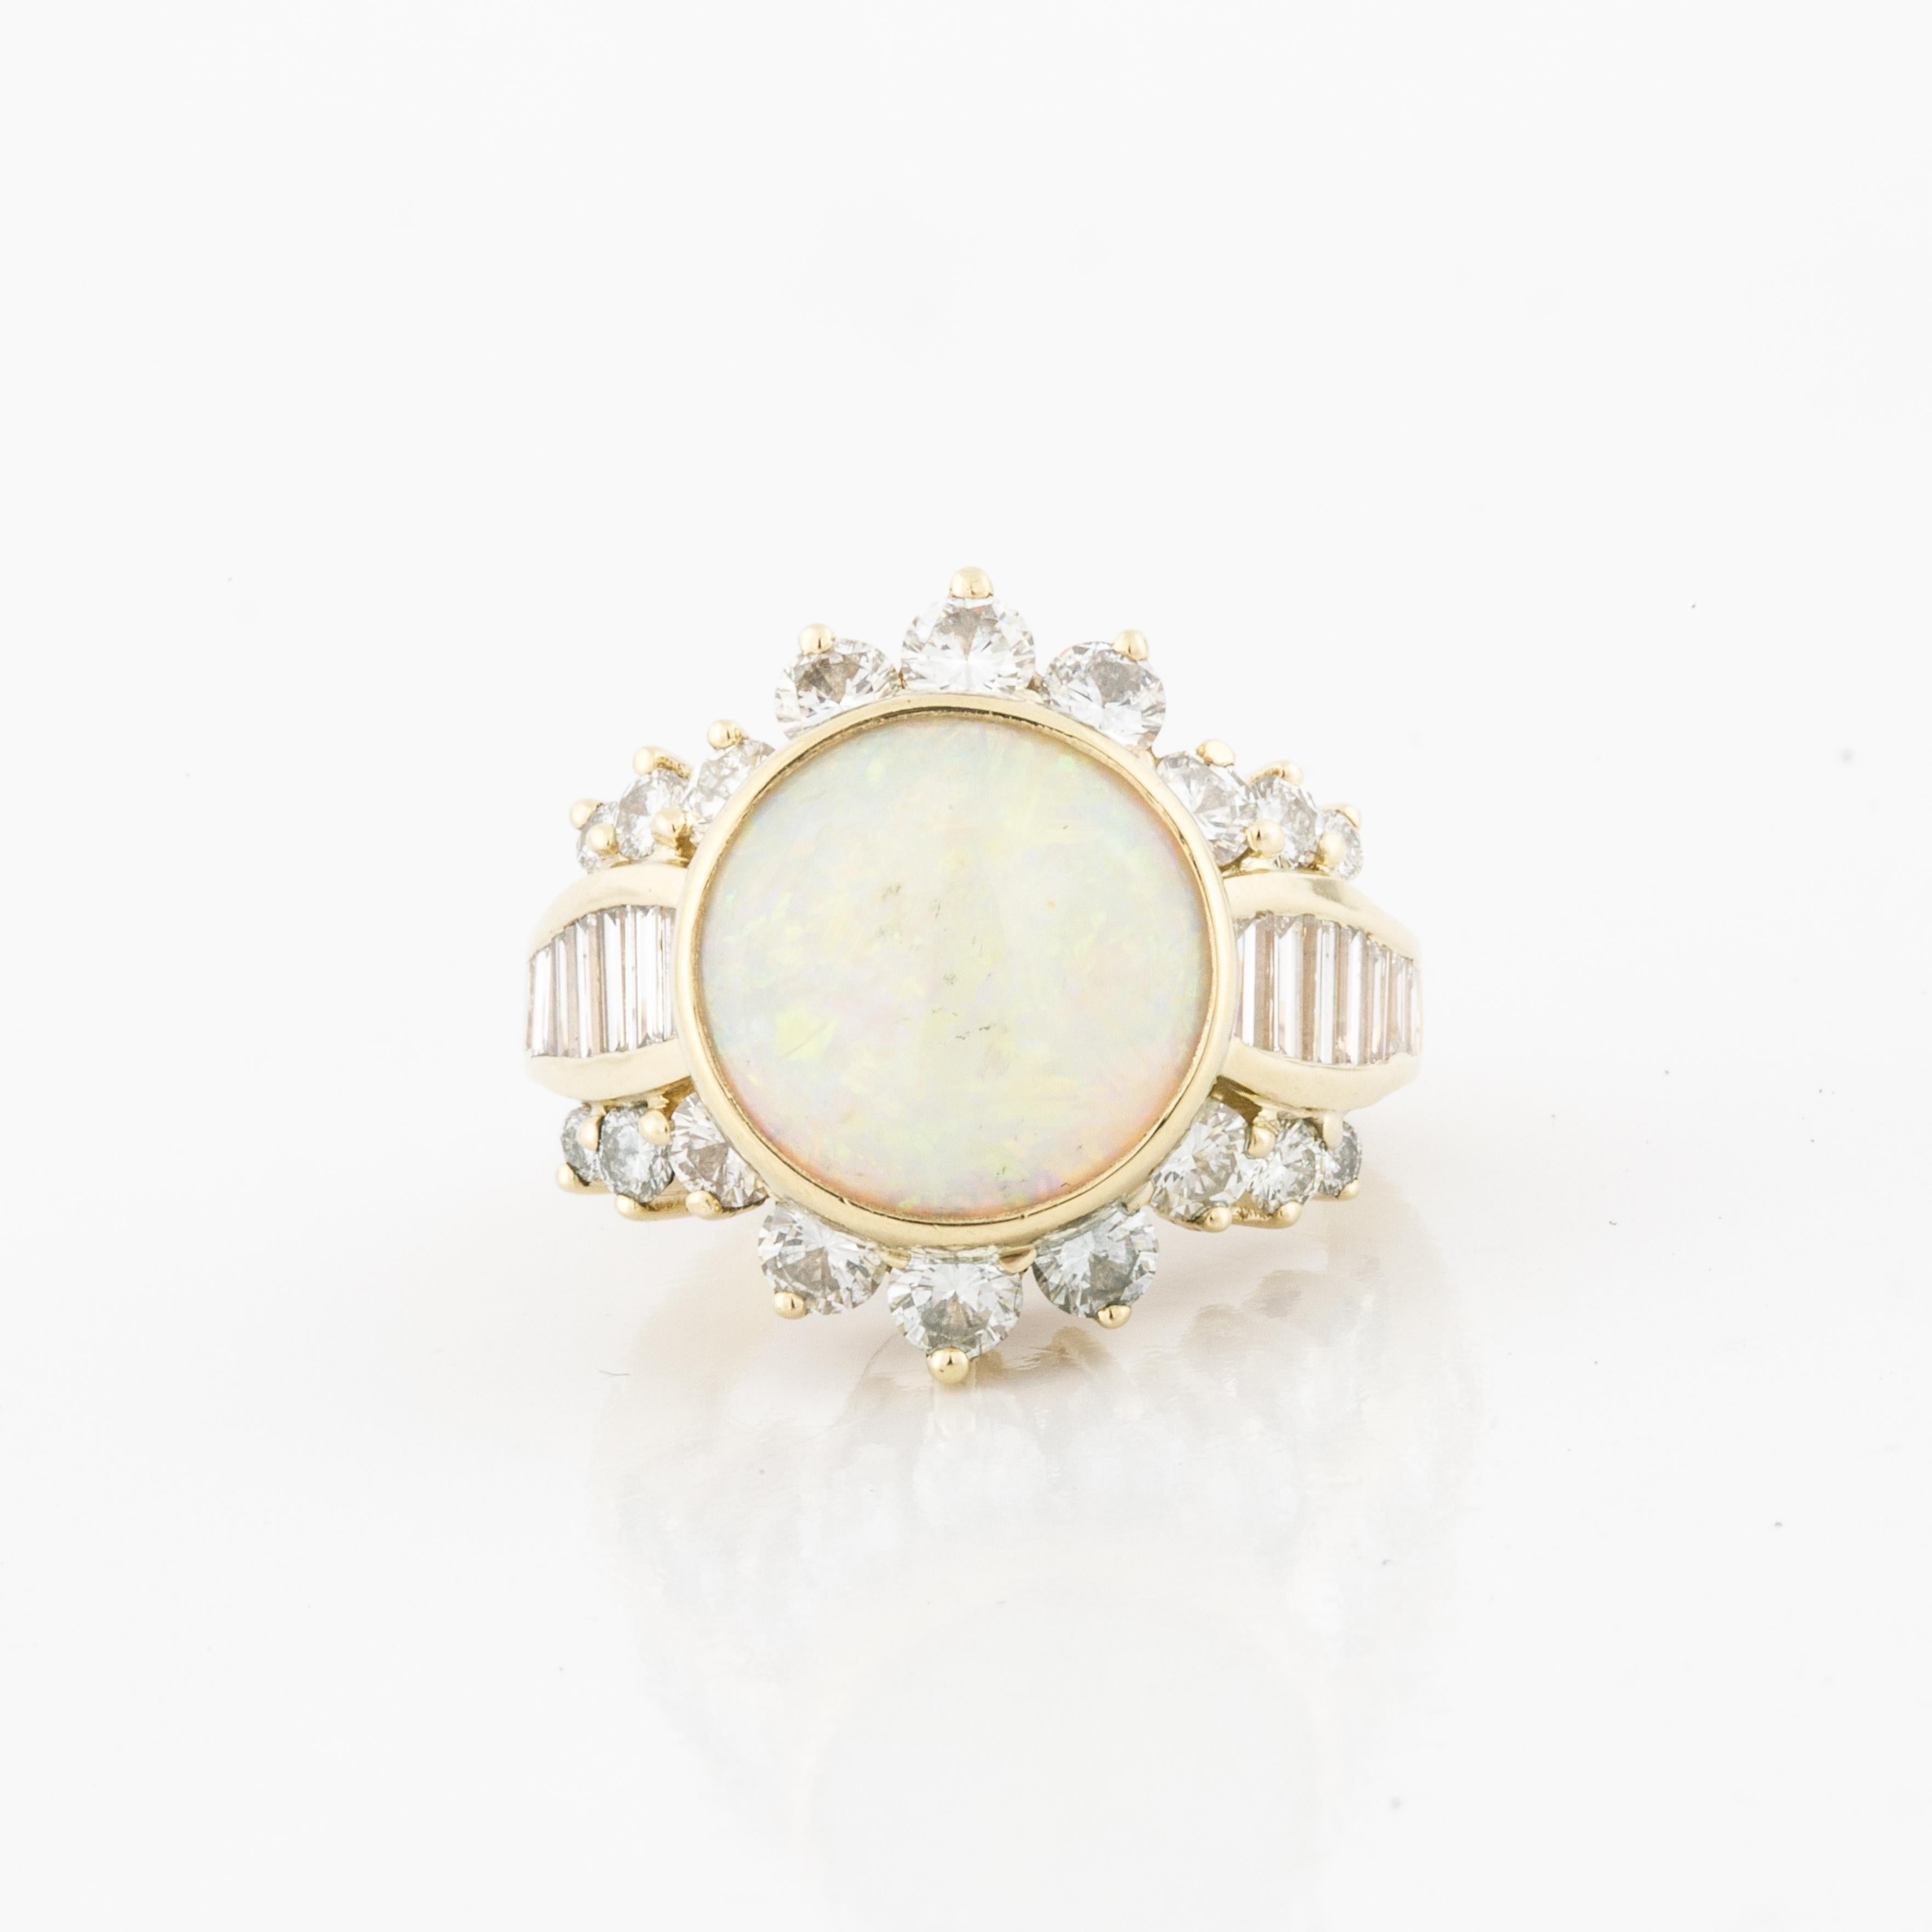 14K yellow gold ring featuring a round white opal accented by round and baguette diamonds. There are 18 round diamonds and 14 baguette diamonds that total 2.20 carats; H-I color and VS1-VS2 clarity.  The presentation area measures 7/8 inches by